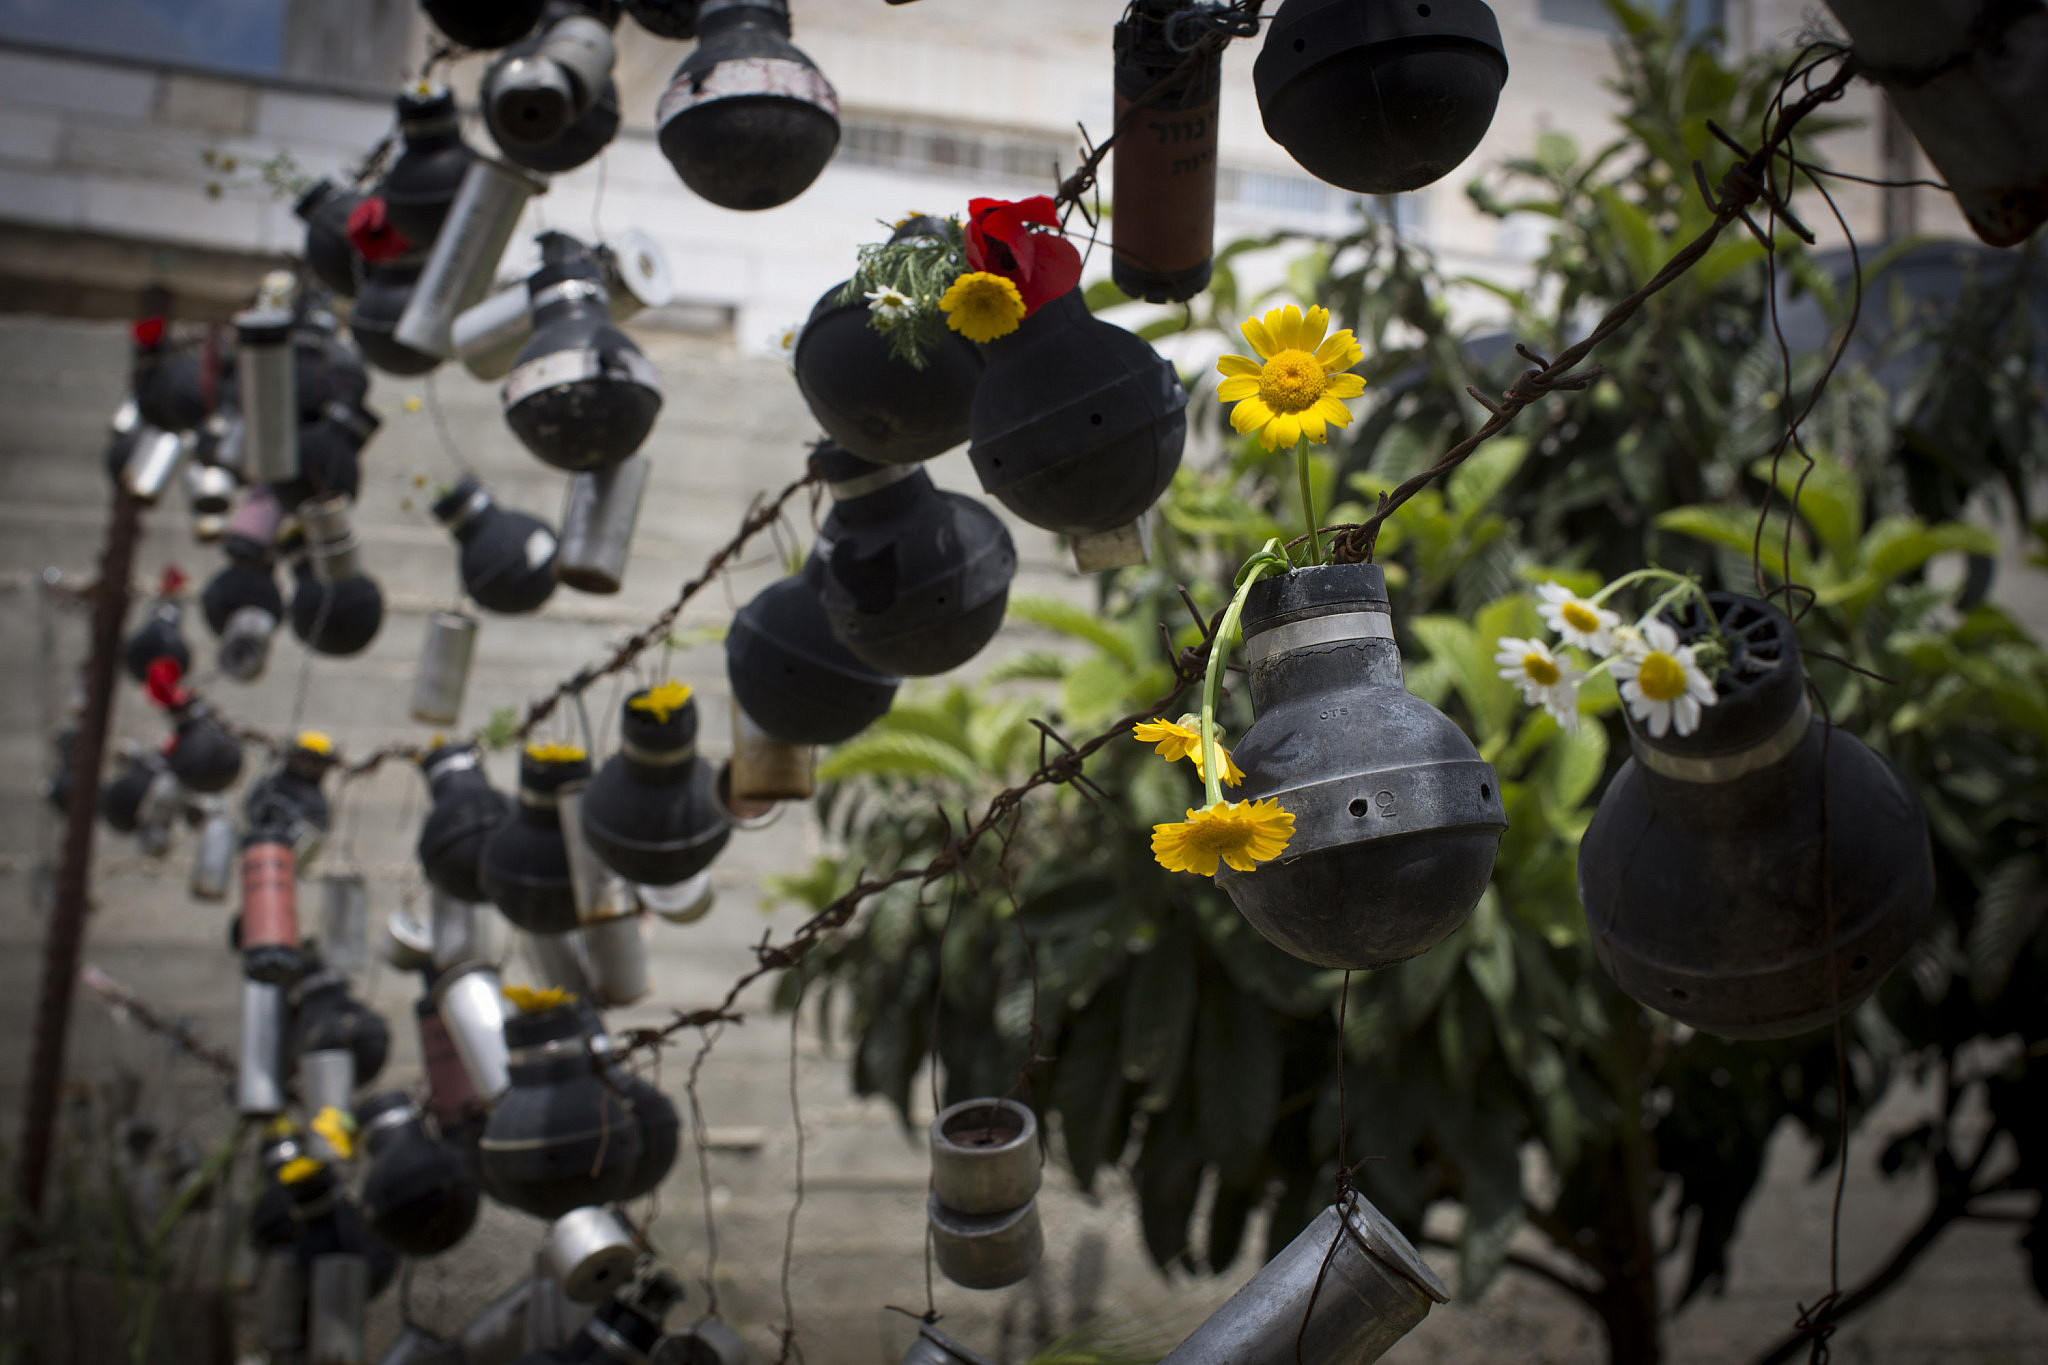 Flowers put inside used tear gas canisters are seen before the weekly protest against the occupation in the West Bank village of Nabi Saleh, April 10, 2015. (Oren Ziv/Activestills)